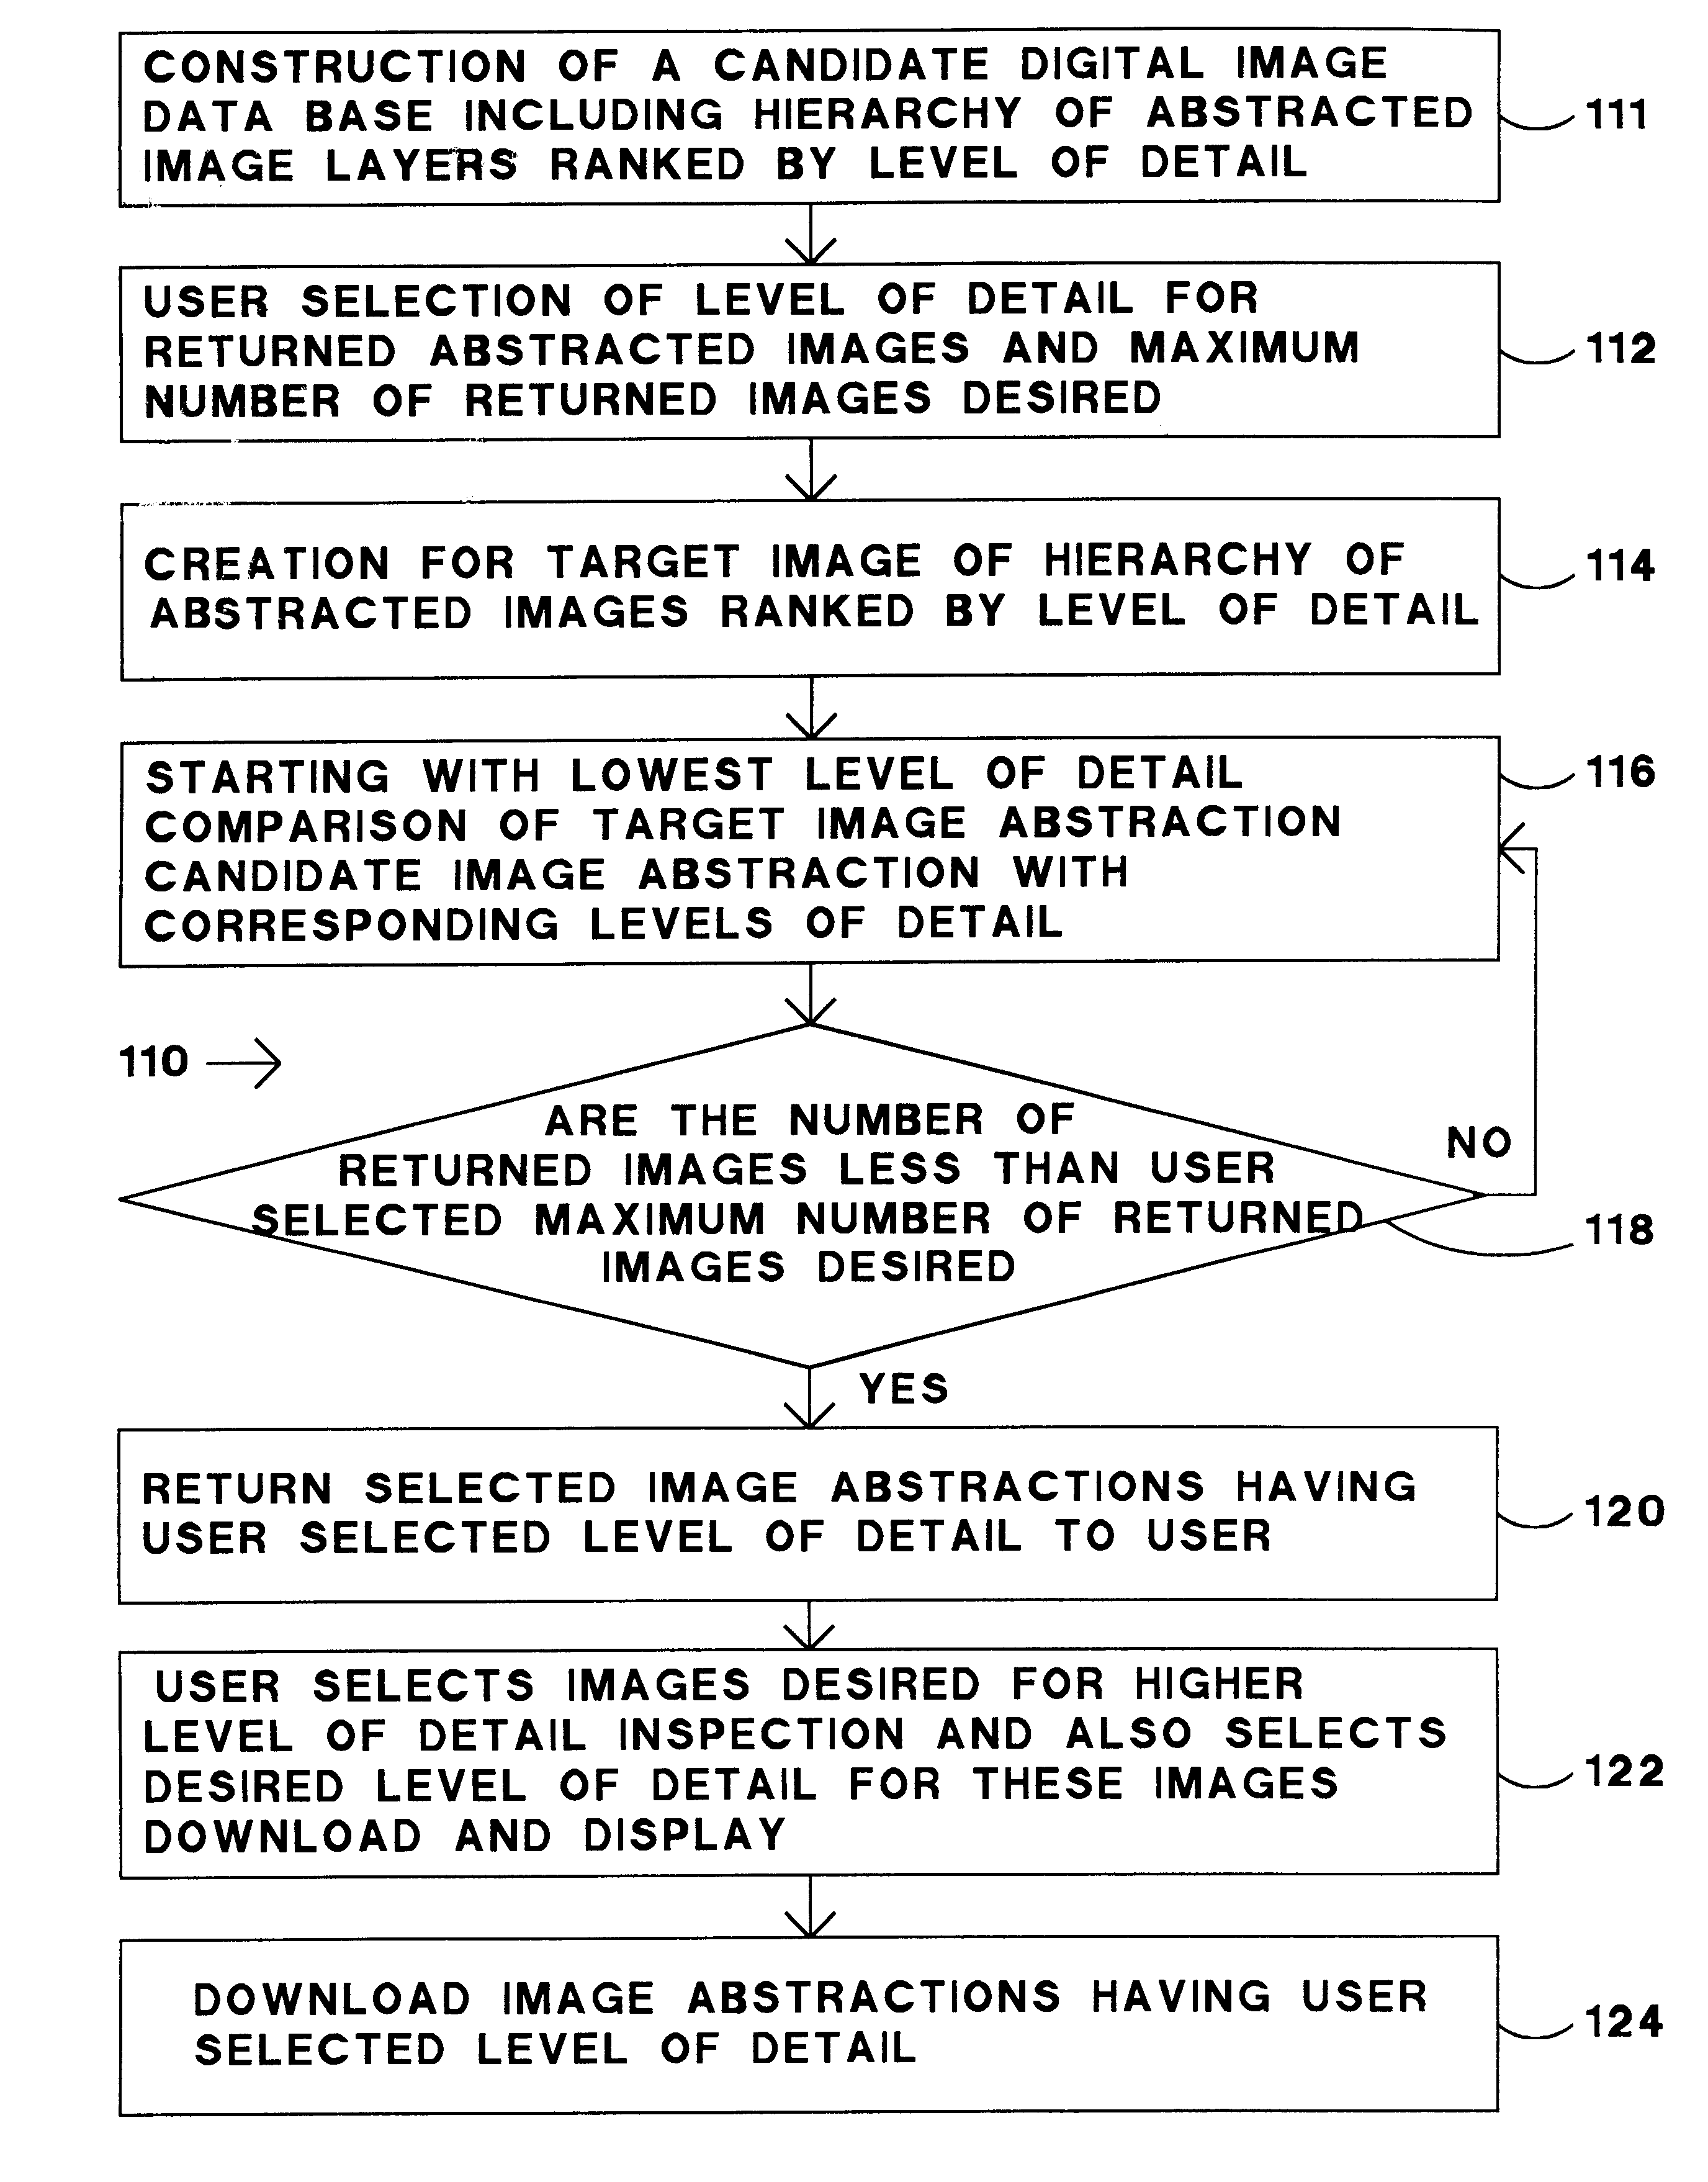 Method for fast return of abstracted images from a digital images database